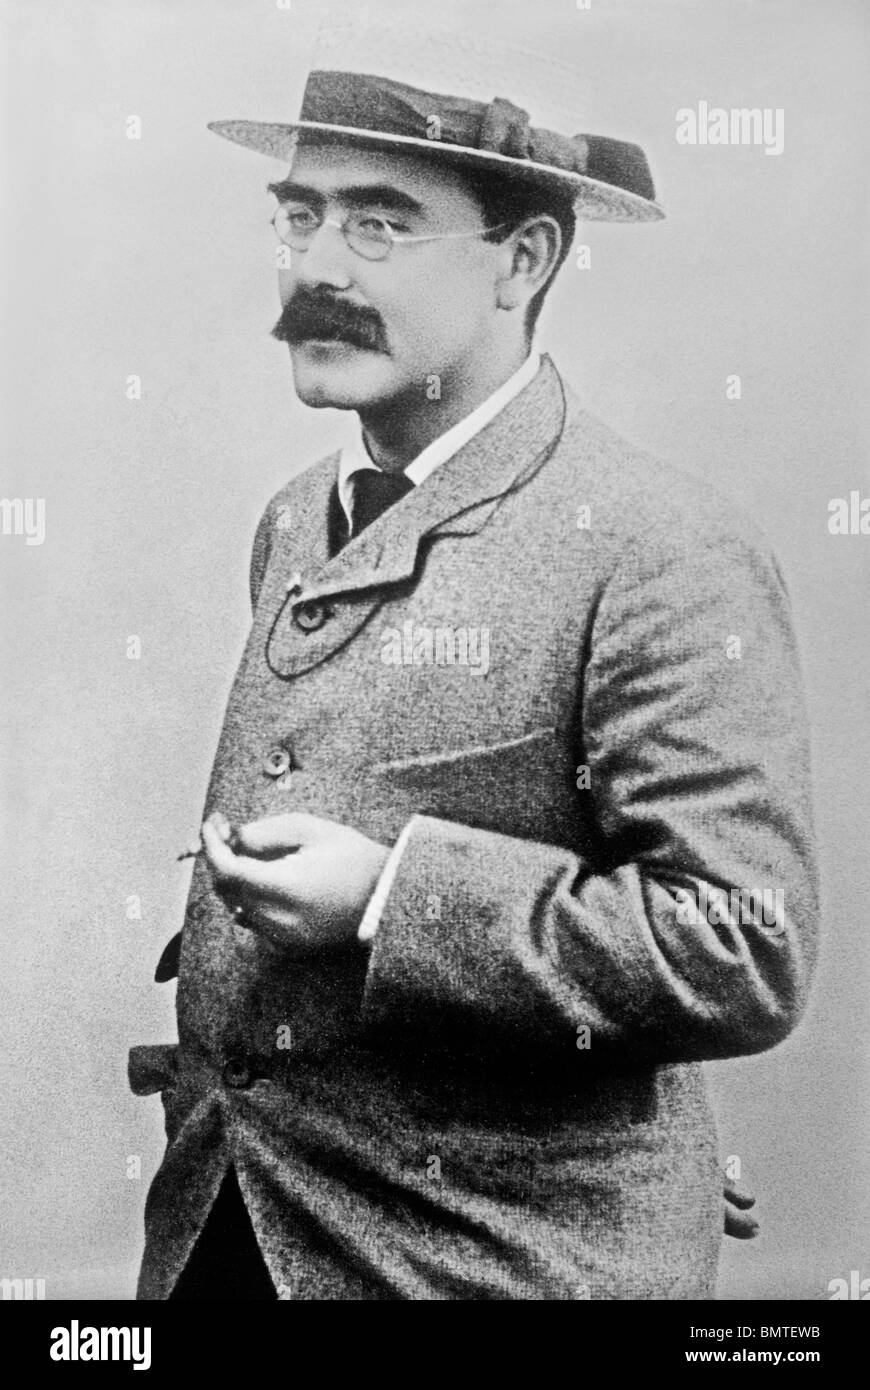 Undated photo of British author and poet Rudyard Kipling (1865 - 1936) - winner of the Nobel Prize in Literature in 1907. Stock Photo